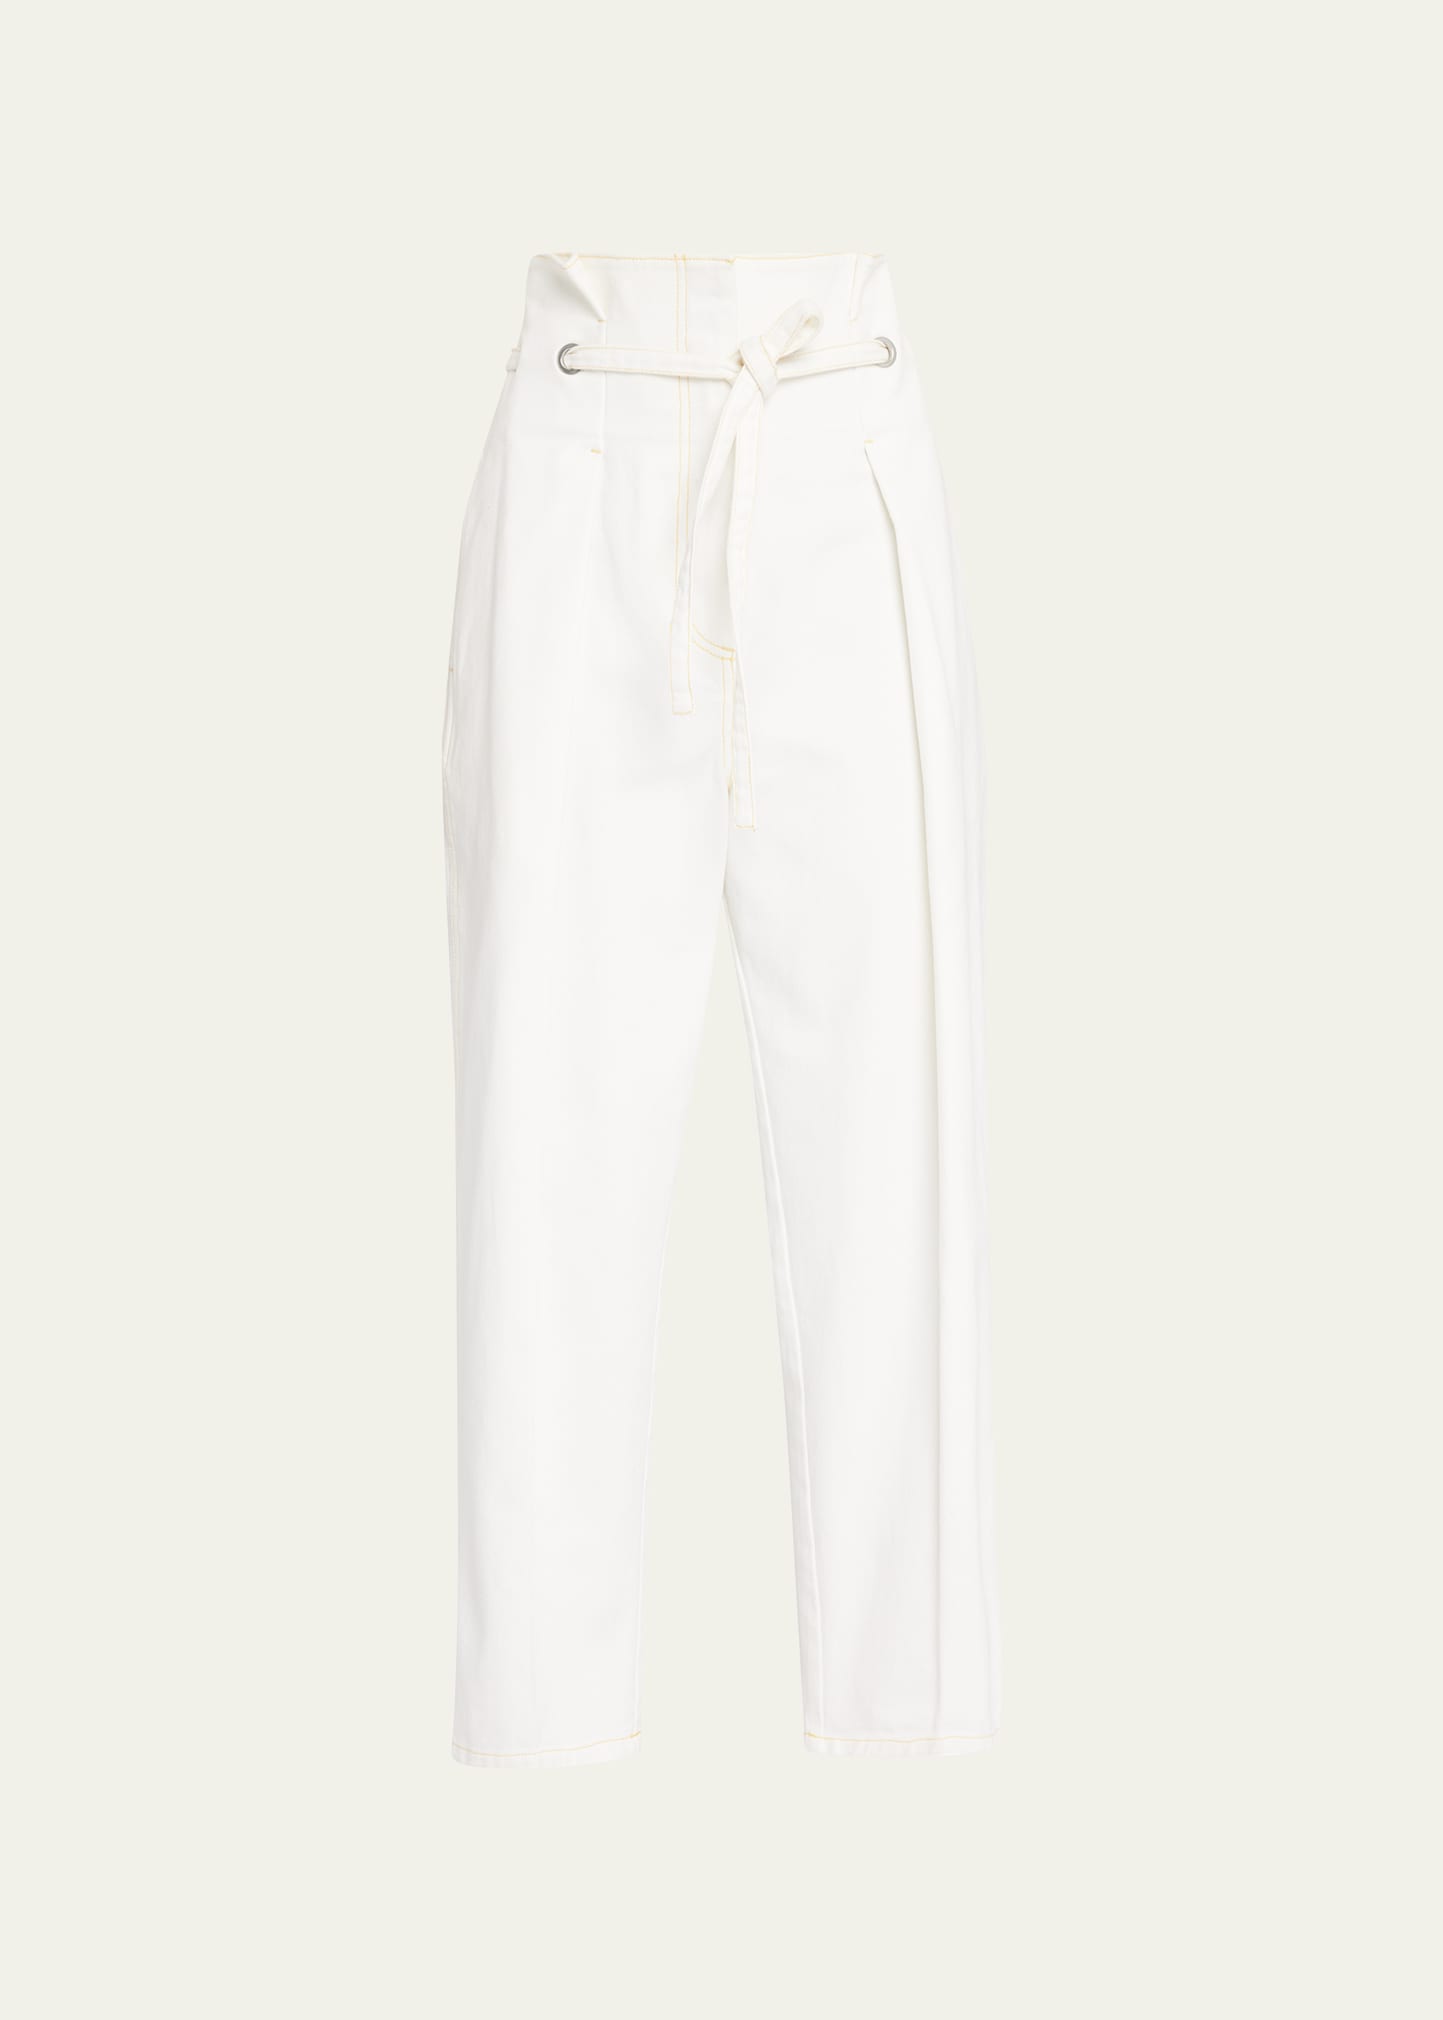 3.1 Phillip Lim Origami Chino Belted Pants